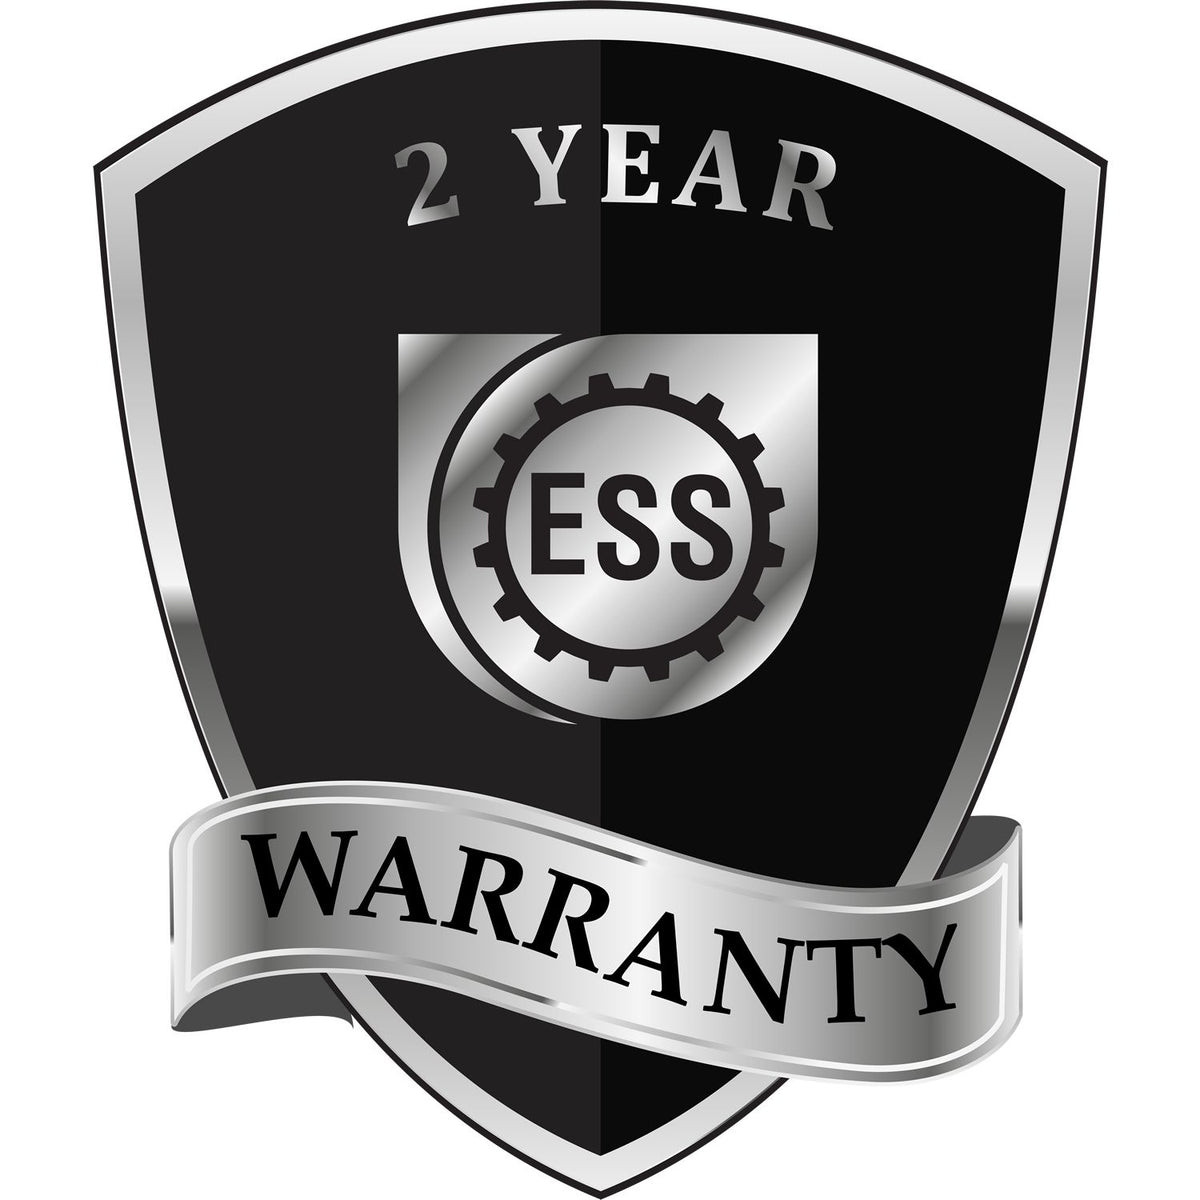 A badge or emblem showing a warranty icon for the Maine Desk Architect Embossing Seal